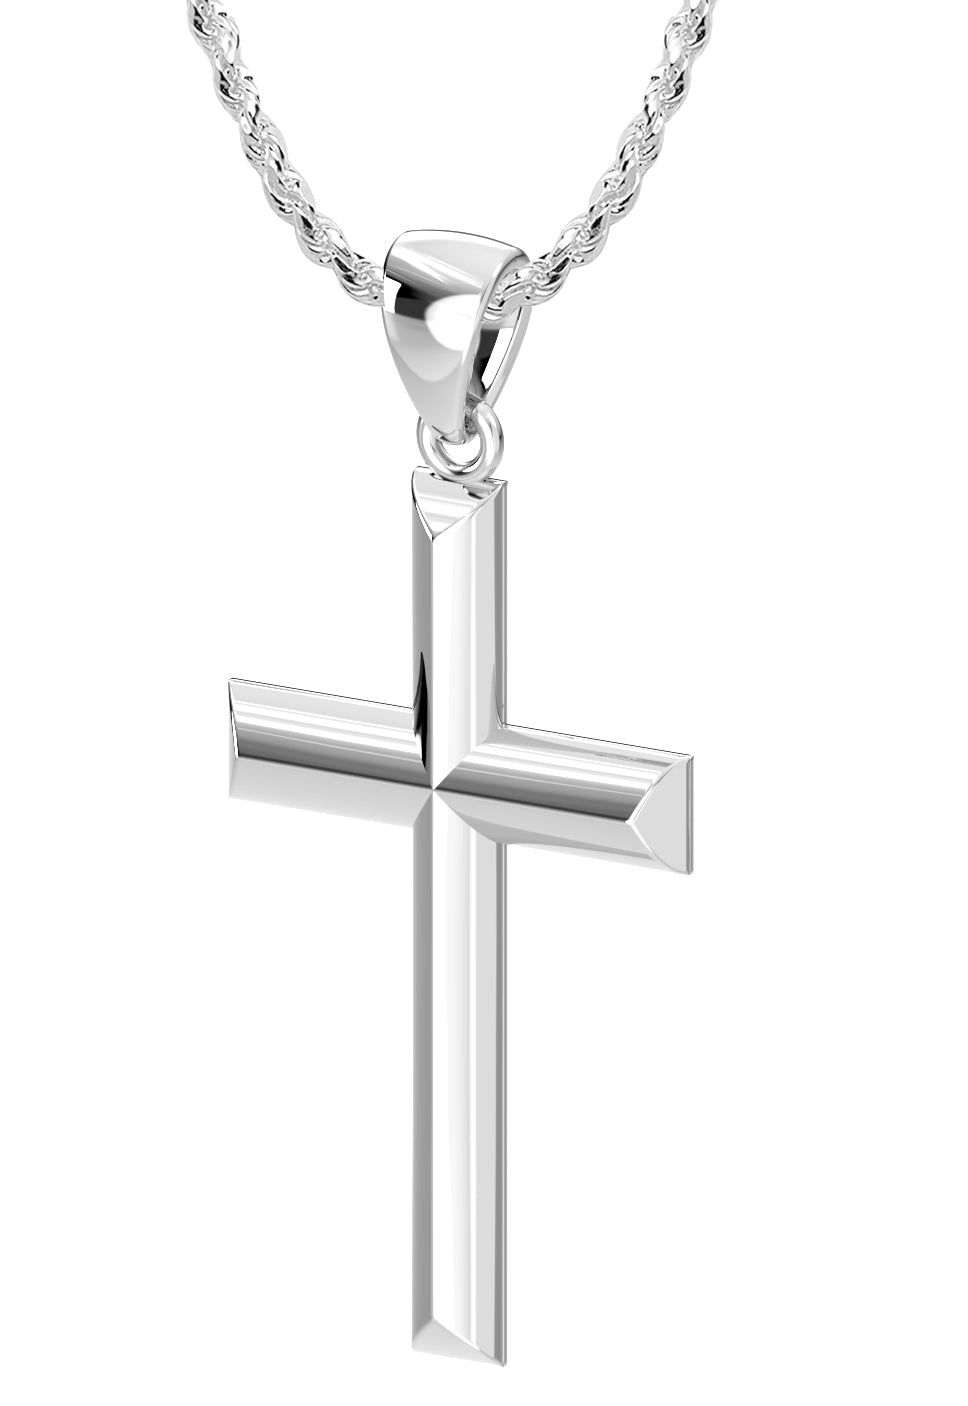 Ladies 14K Yellow or White Gold Christian Cross Pendant Necklace, 23mm - US Jewels